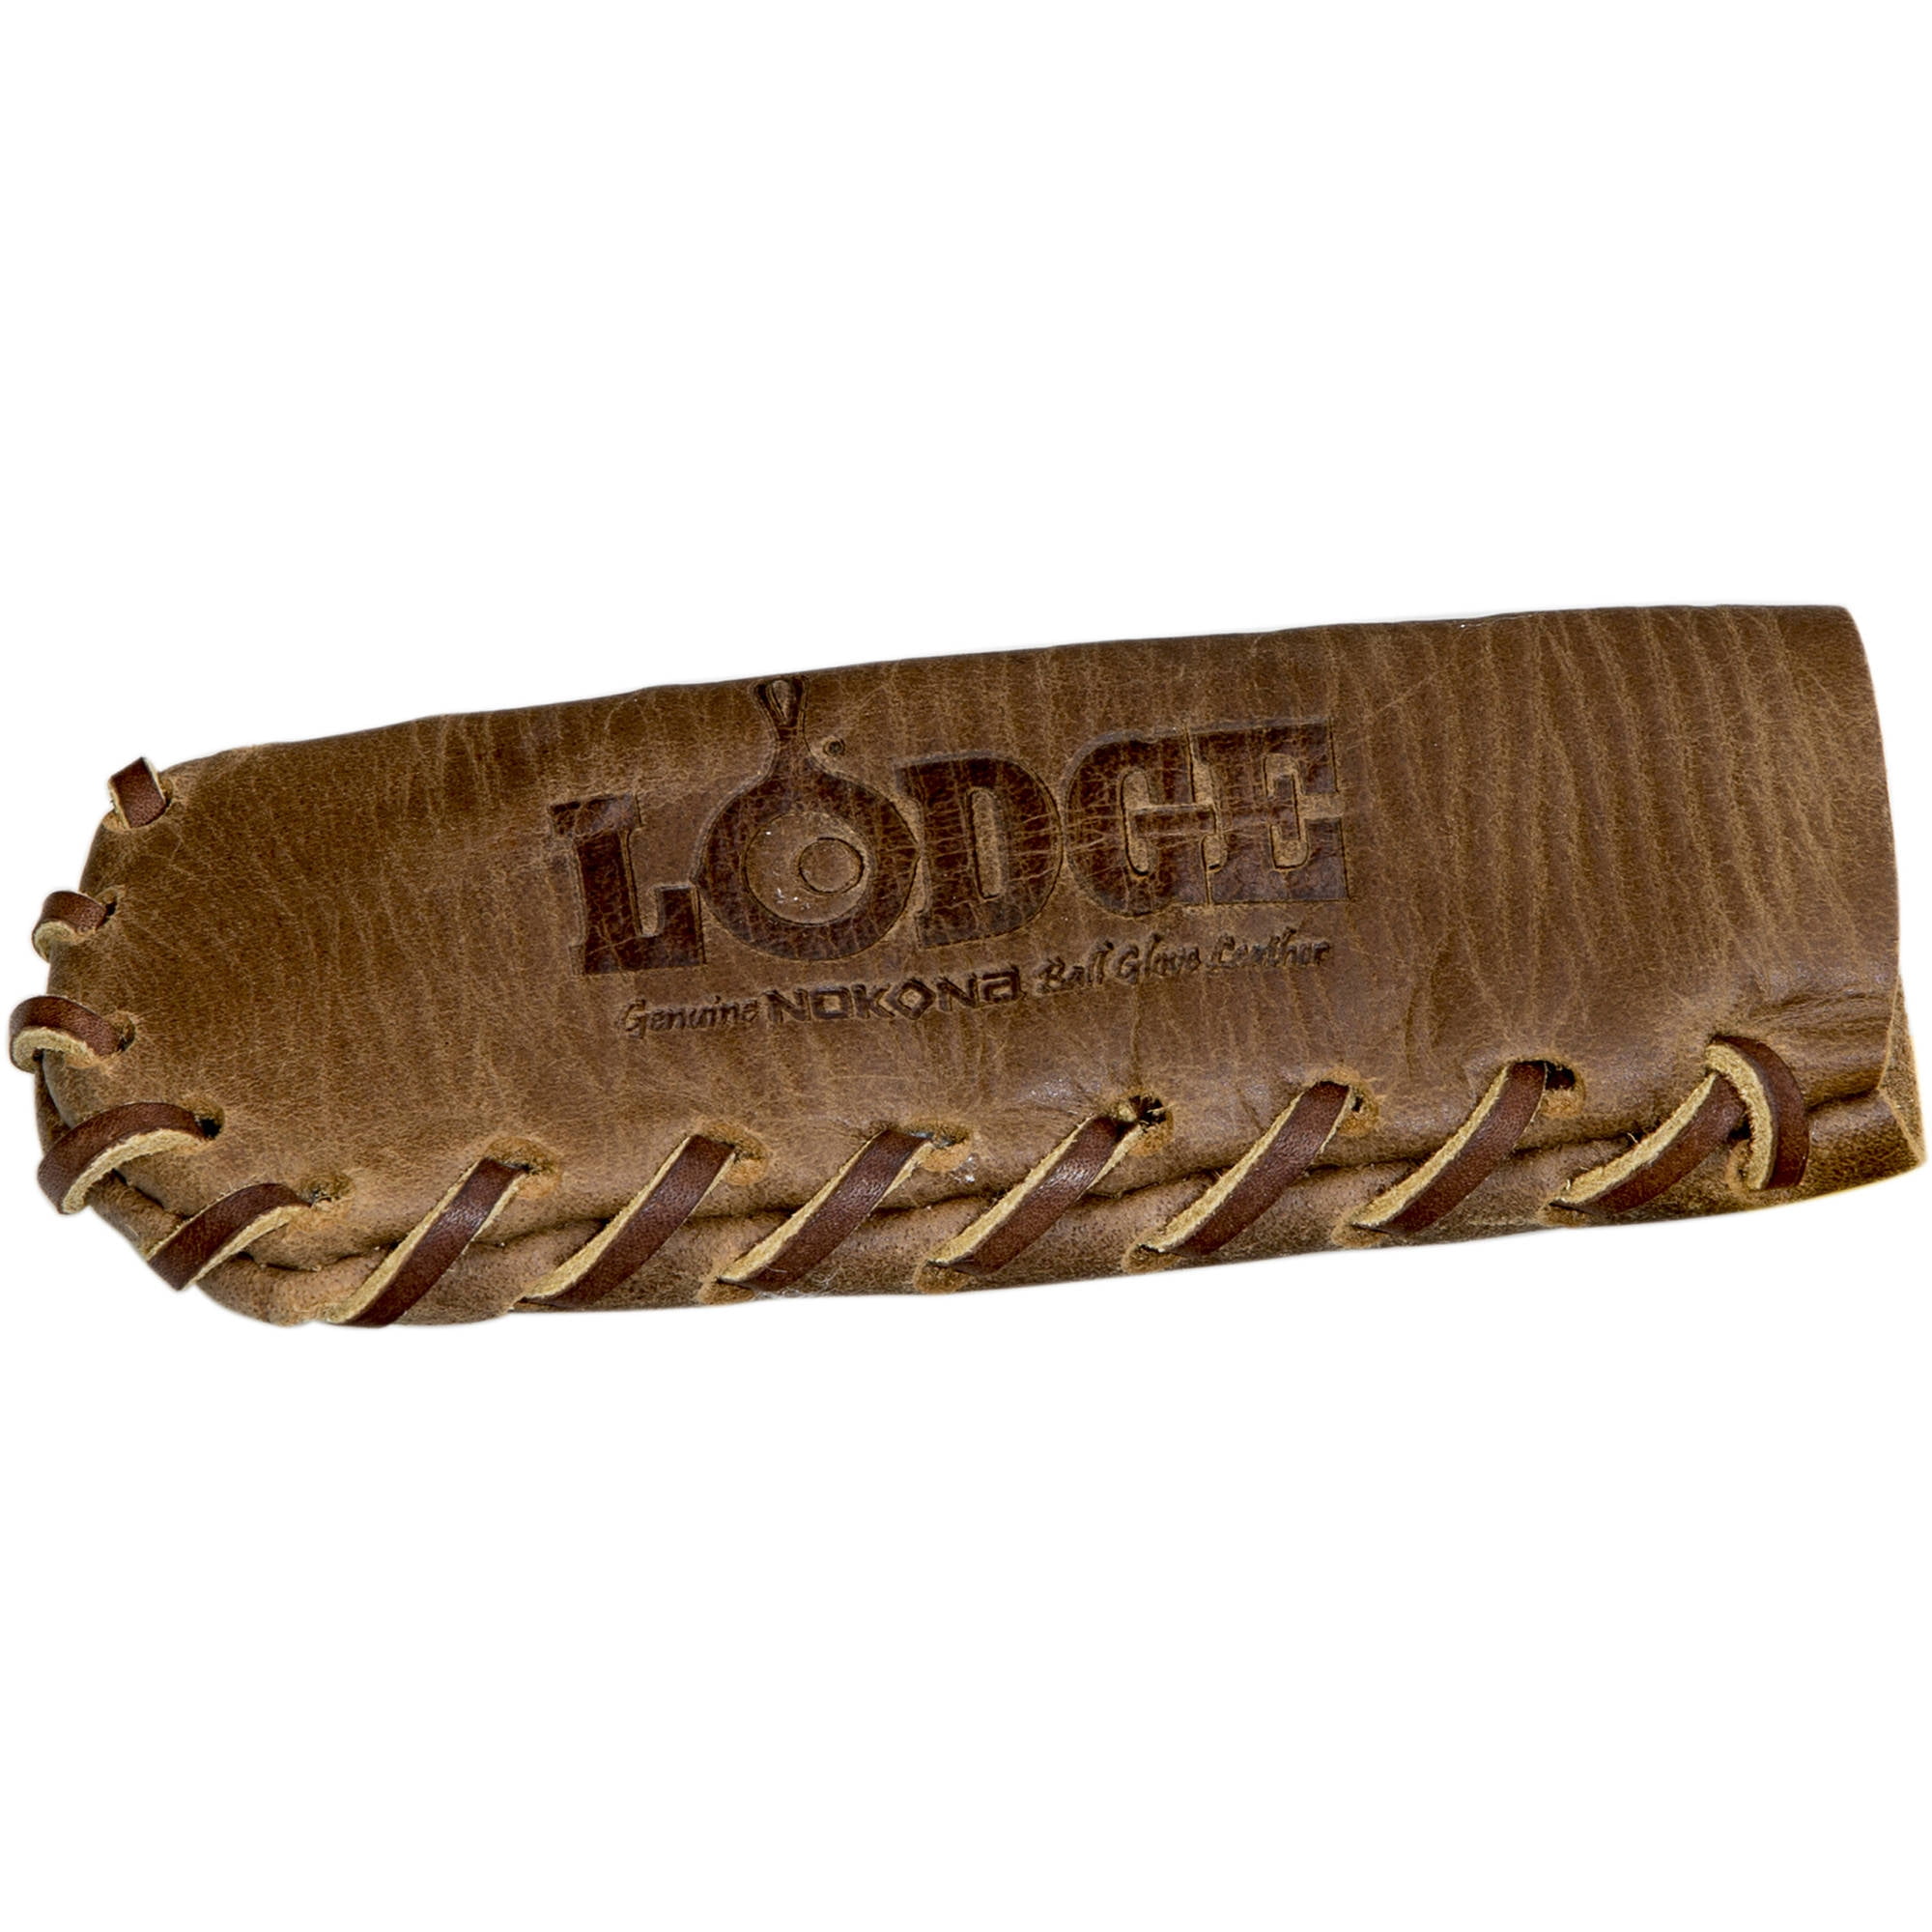 Lodge Cast Iron Nokona Leather Handle Mitt, Sprial Stitched, ALHHSS85,  coffee color